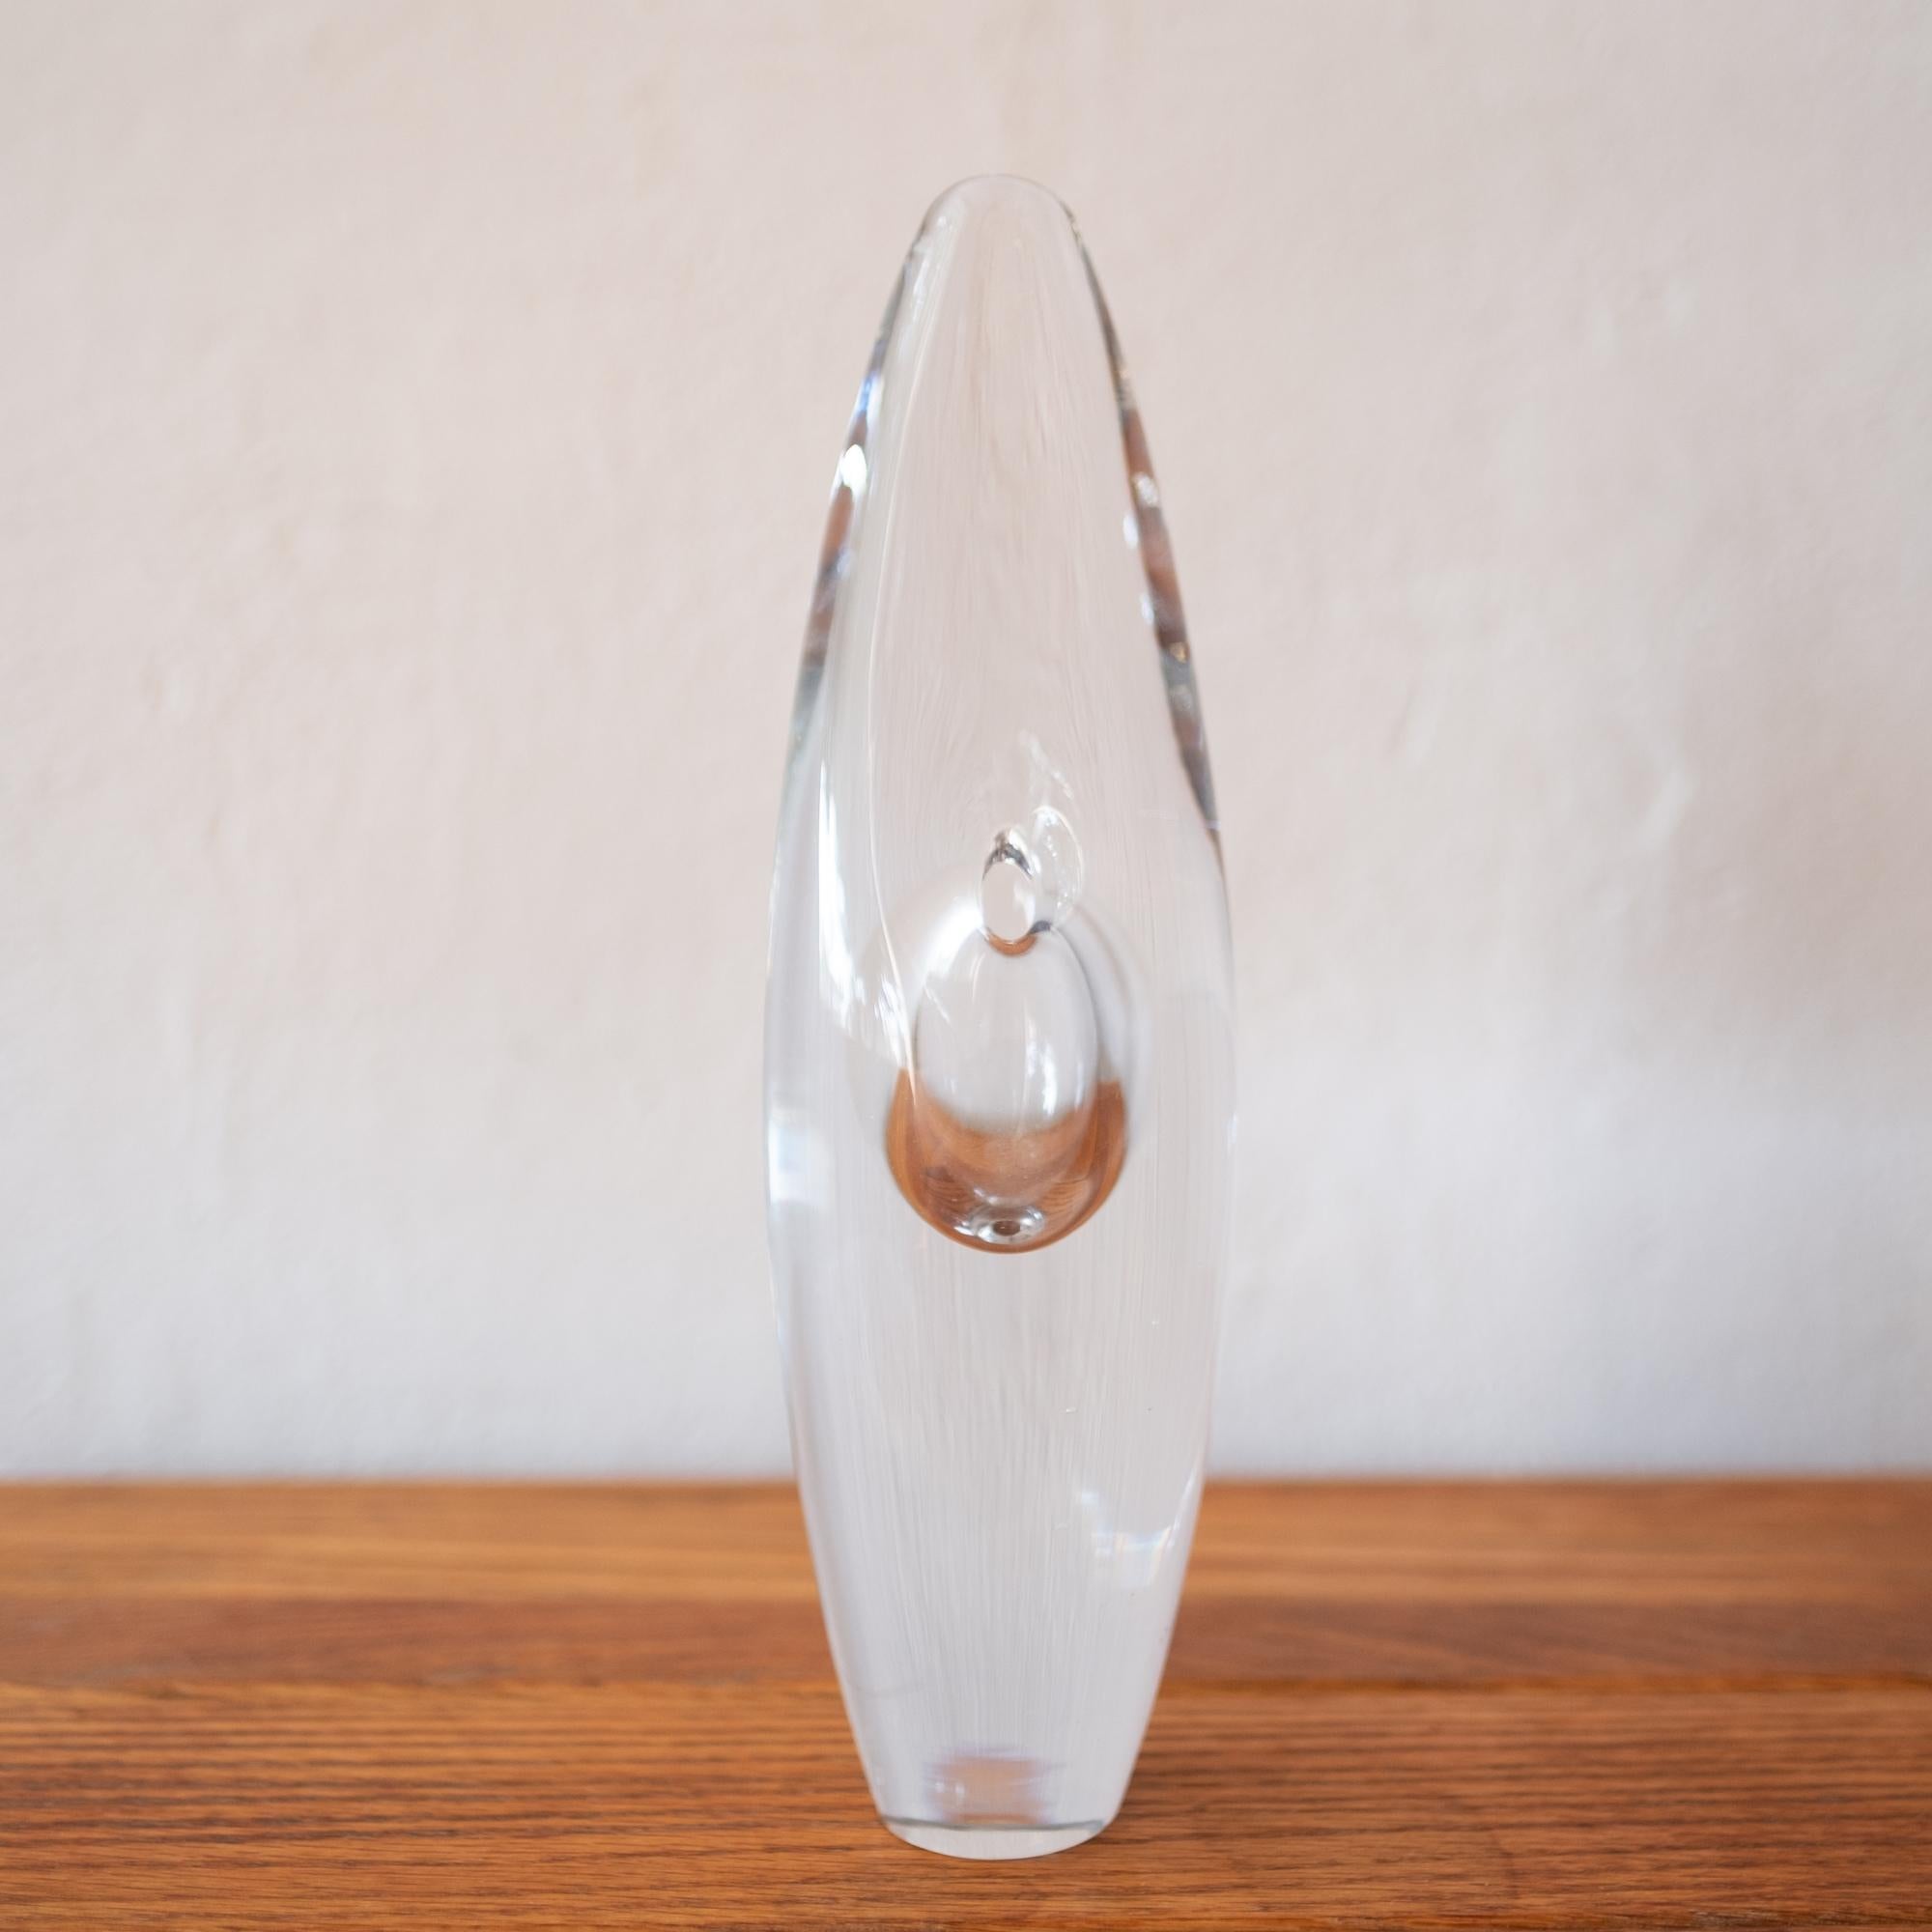 Crystal Timo Sarpaneva Large 'Orchid' Sculpture by Iittala Finland